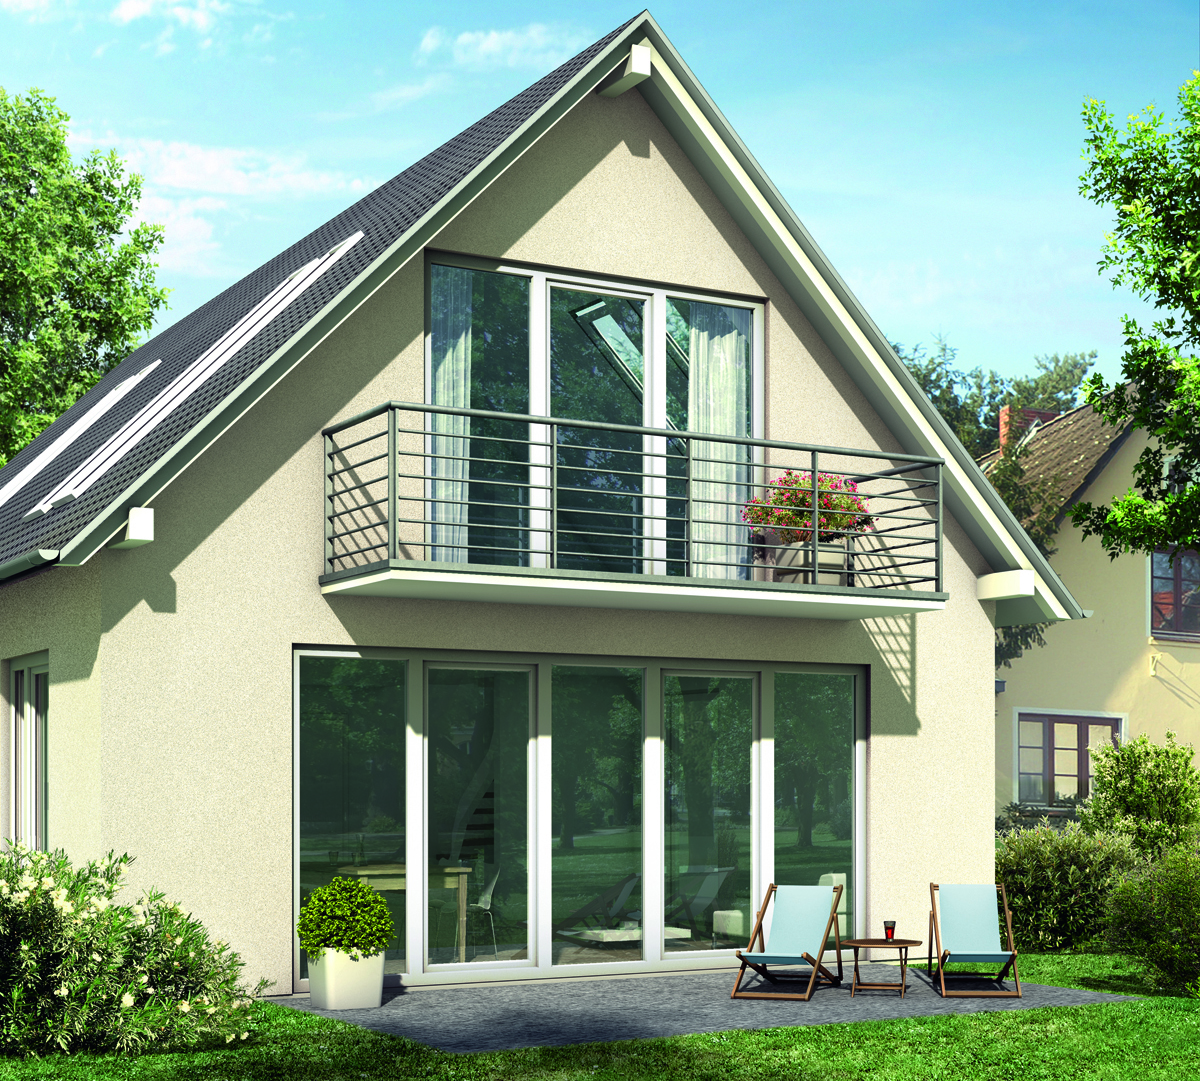 Reliable thermal insulation as the basis for your dream home